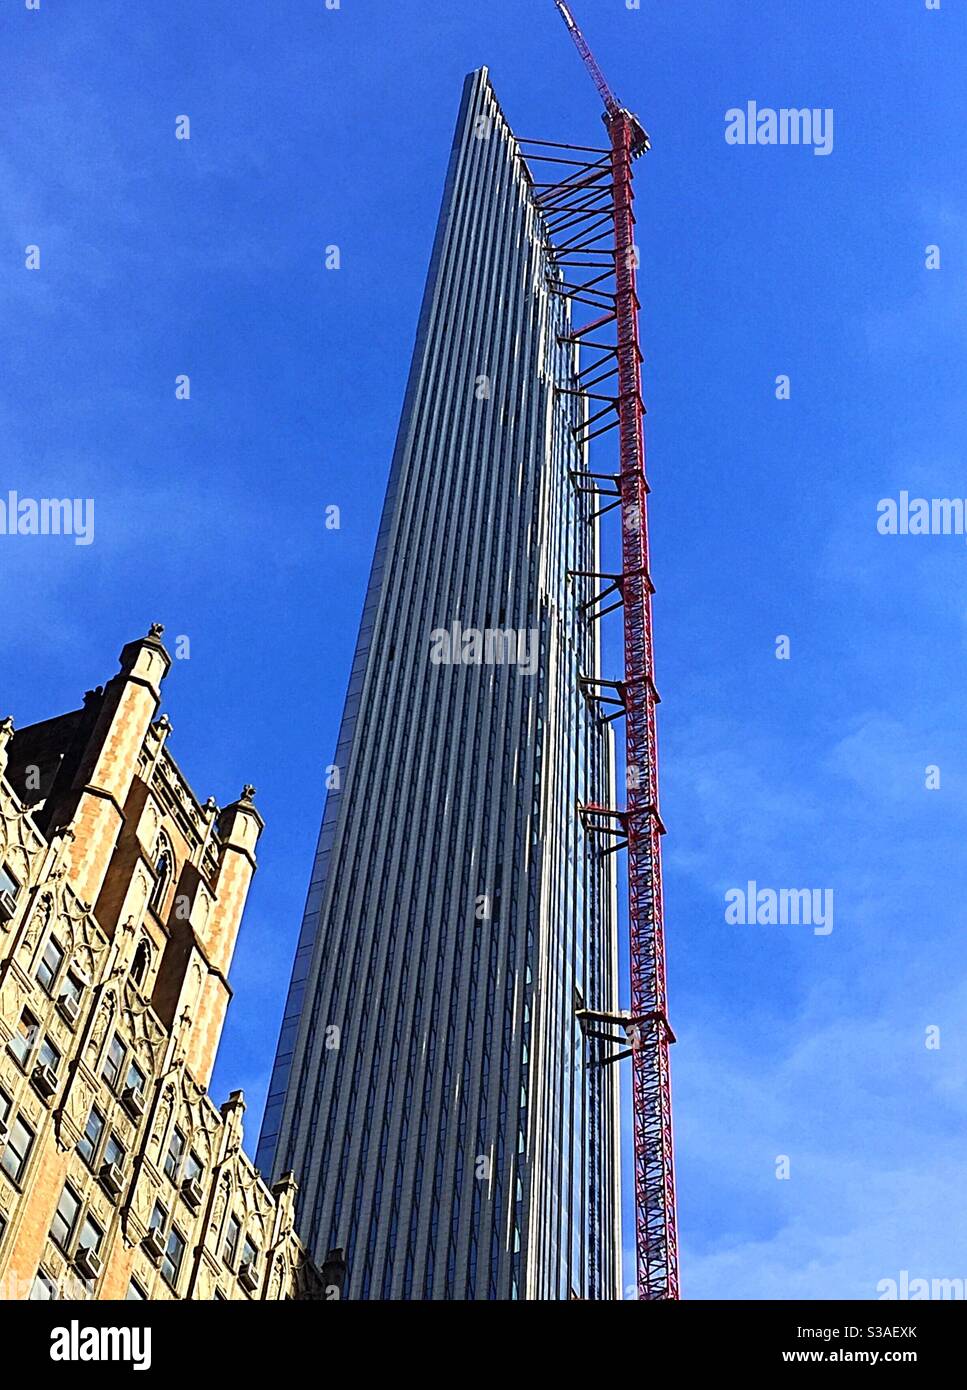 The skinniest skyscraper: 111 West 57th Street, Features